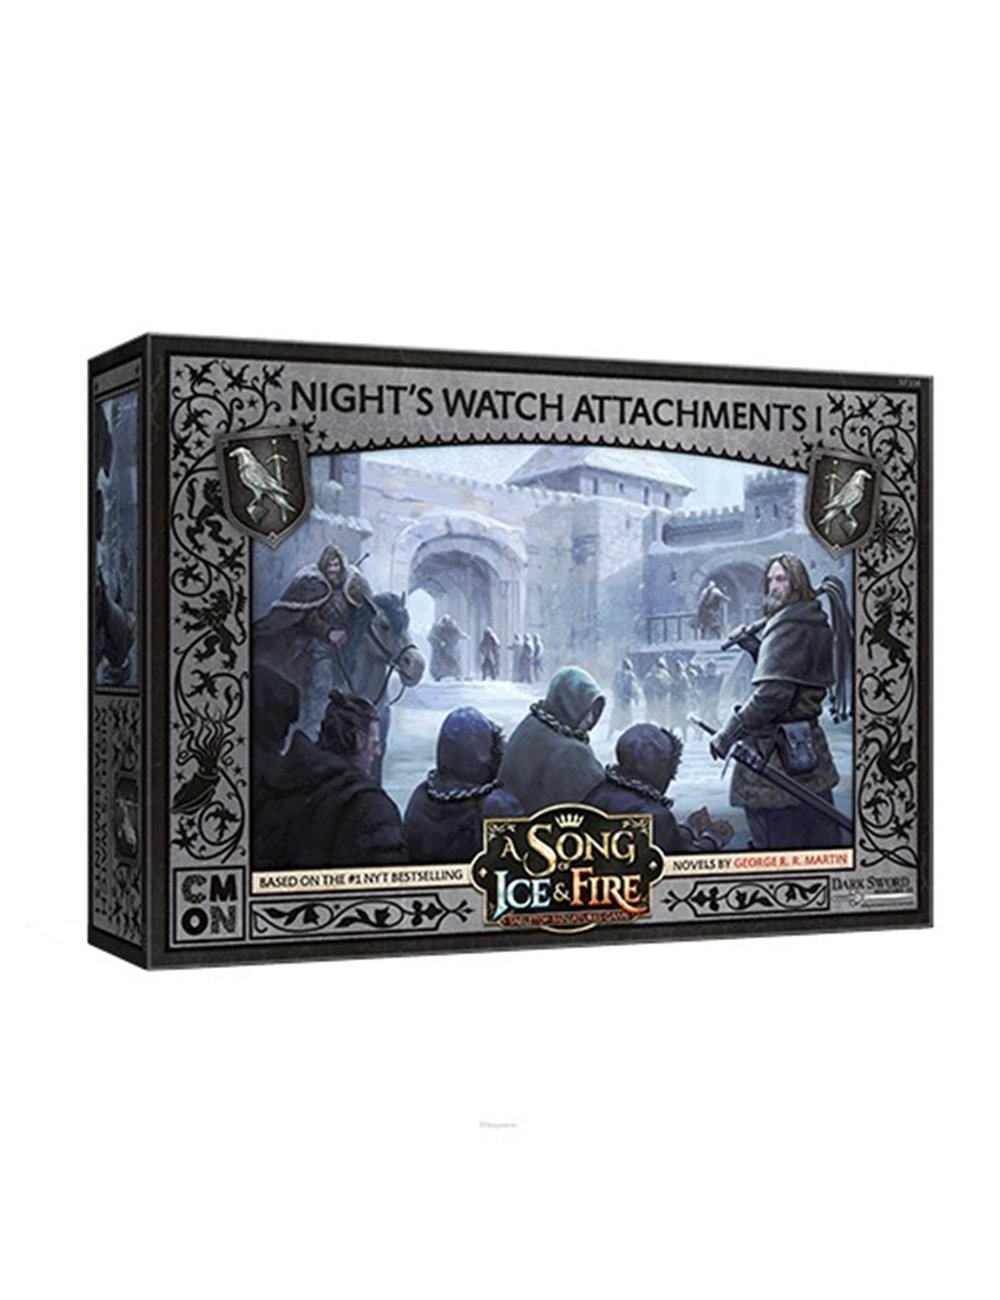 A SONG OF ICE & FIRE - Nights Watch Attachments PL